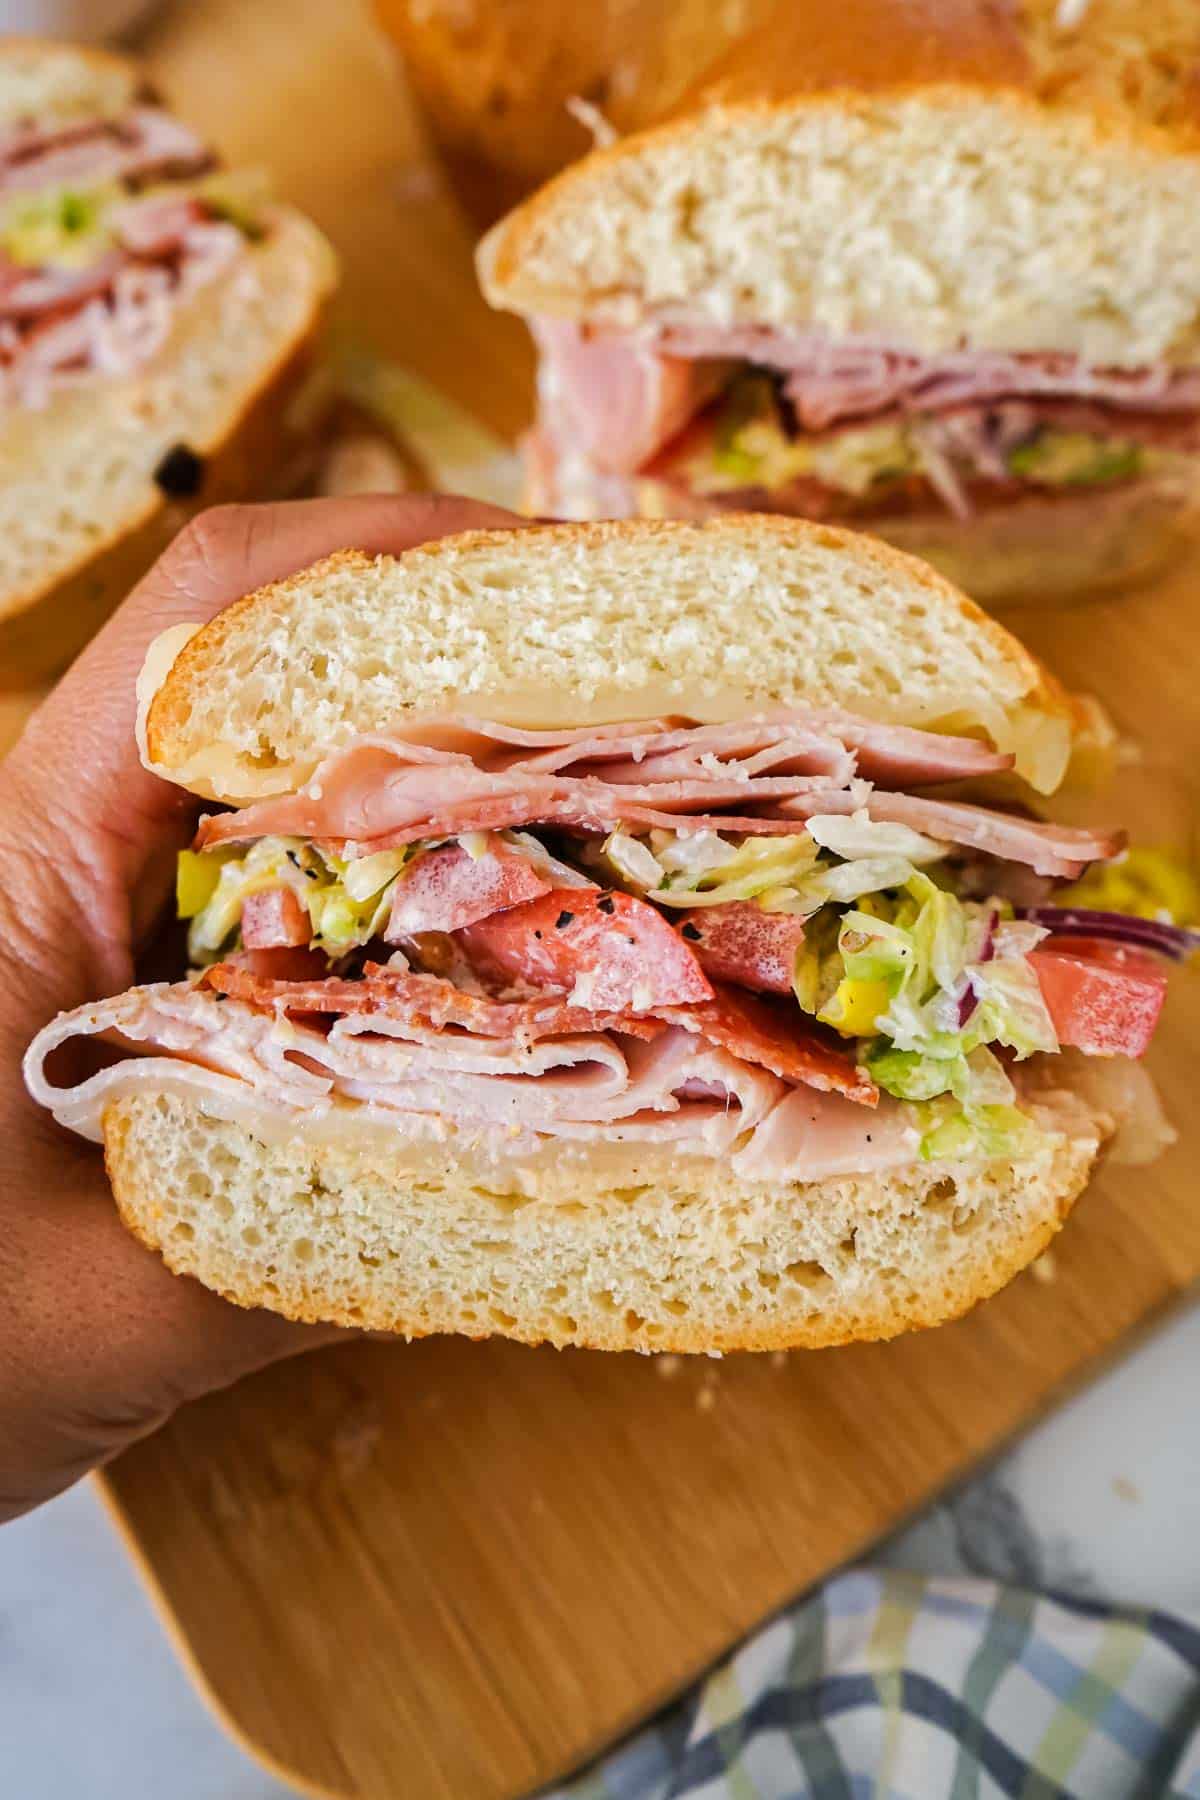 Italian grinder sandwich recipe held by a hand with a wooden board in the background.